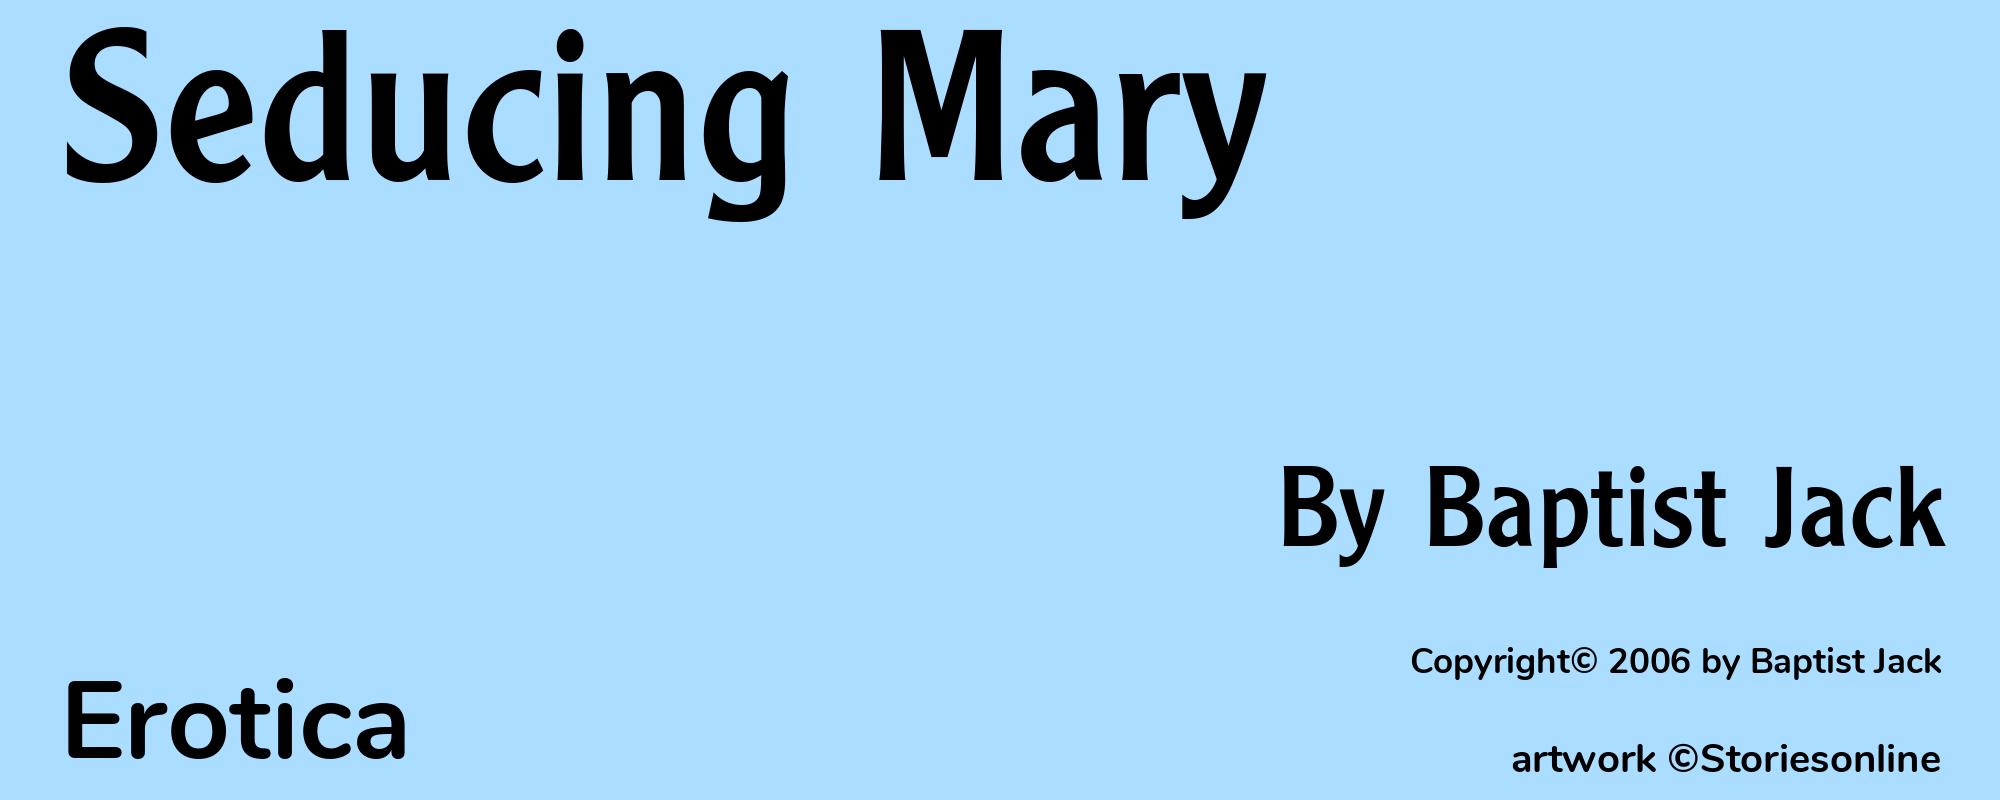 Seducing Mary - Cover